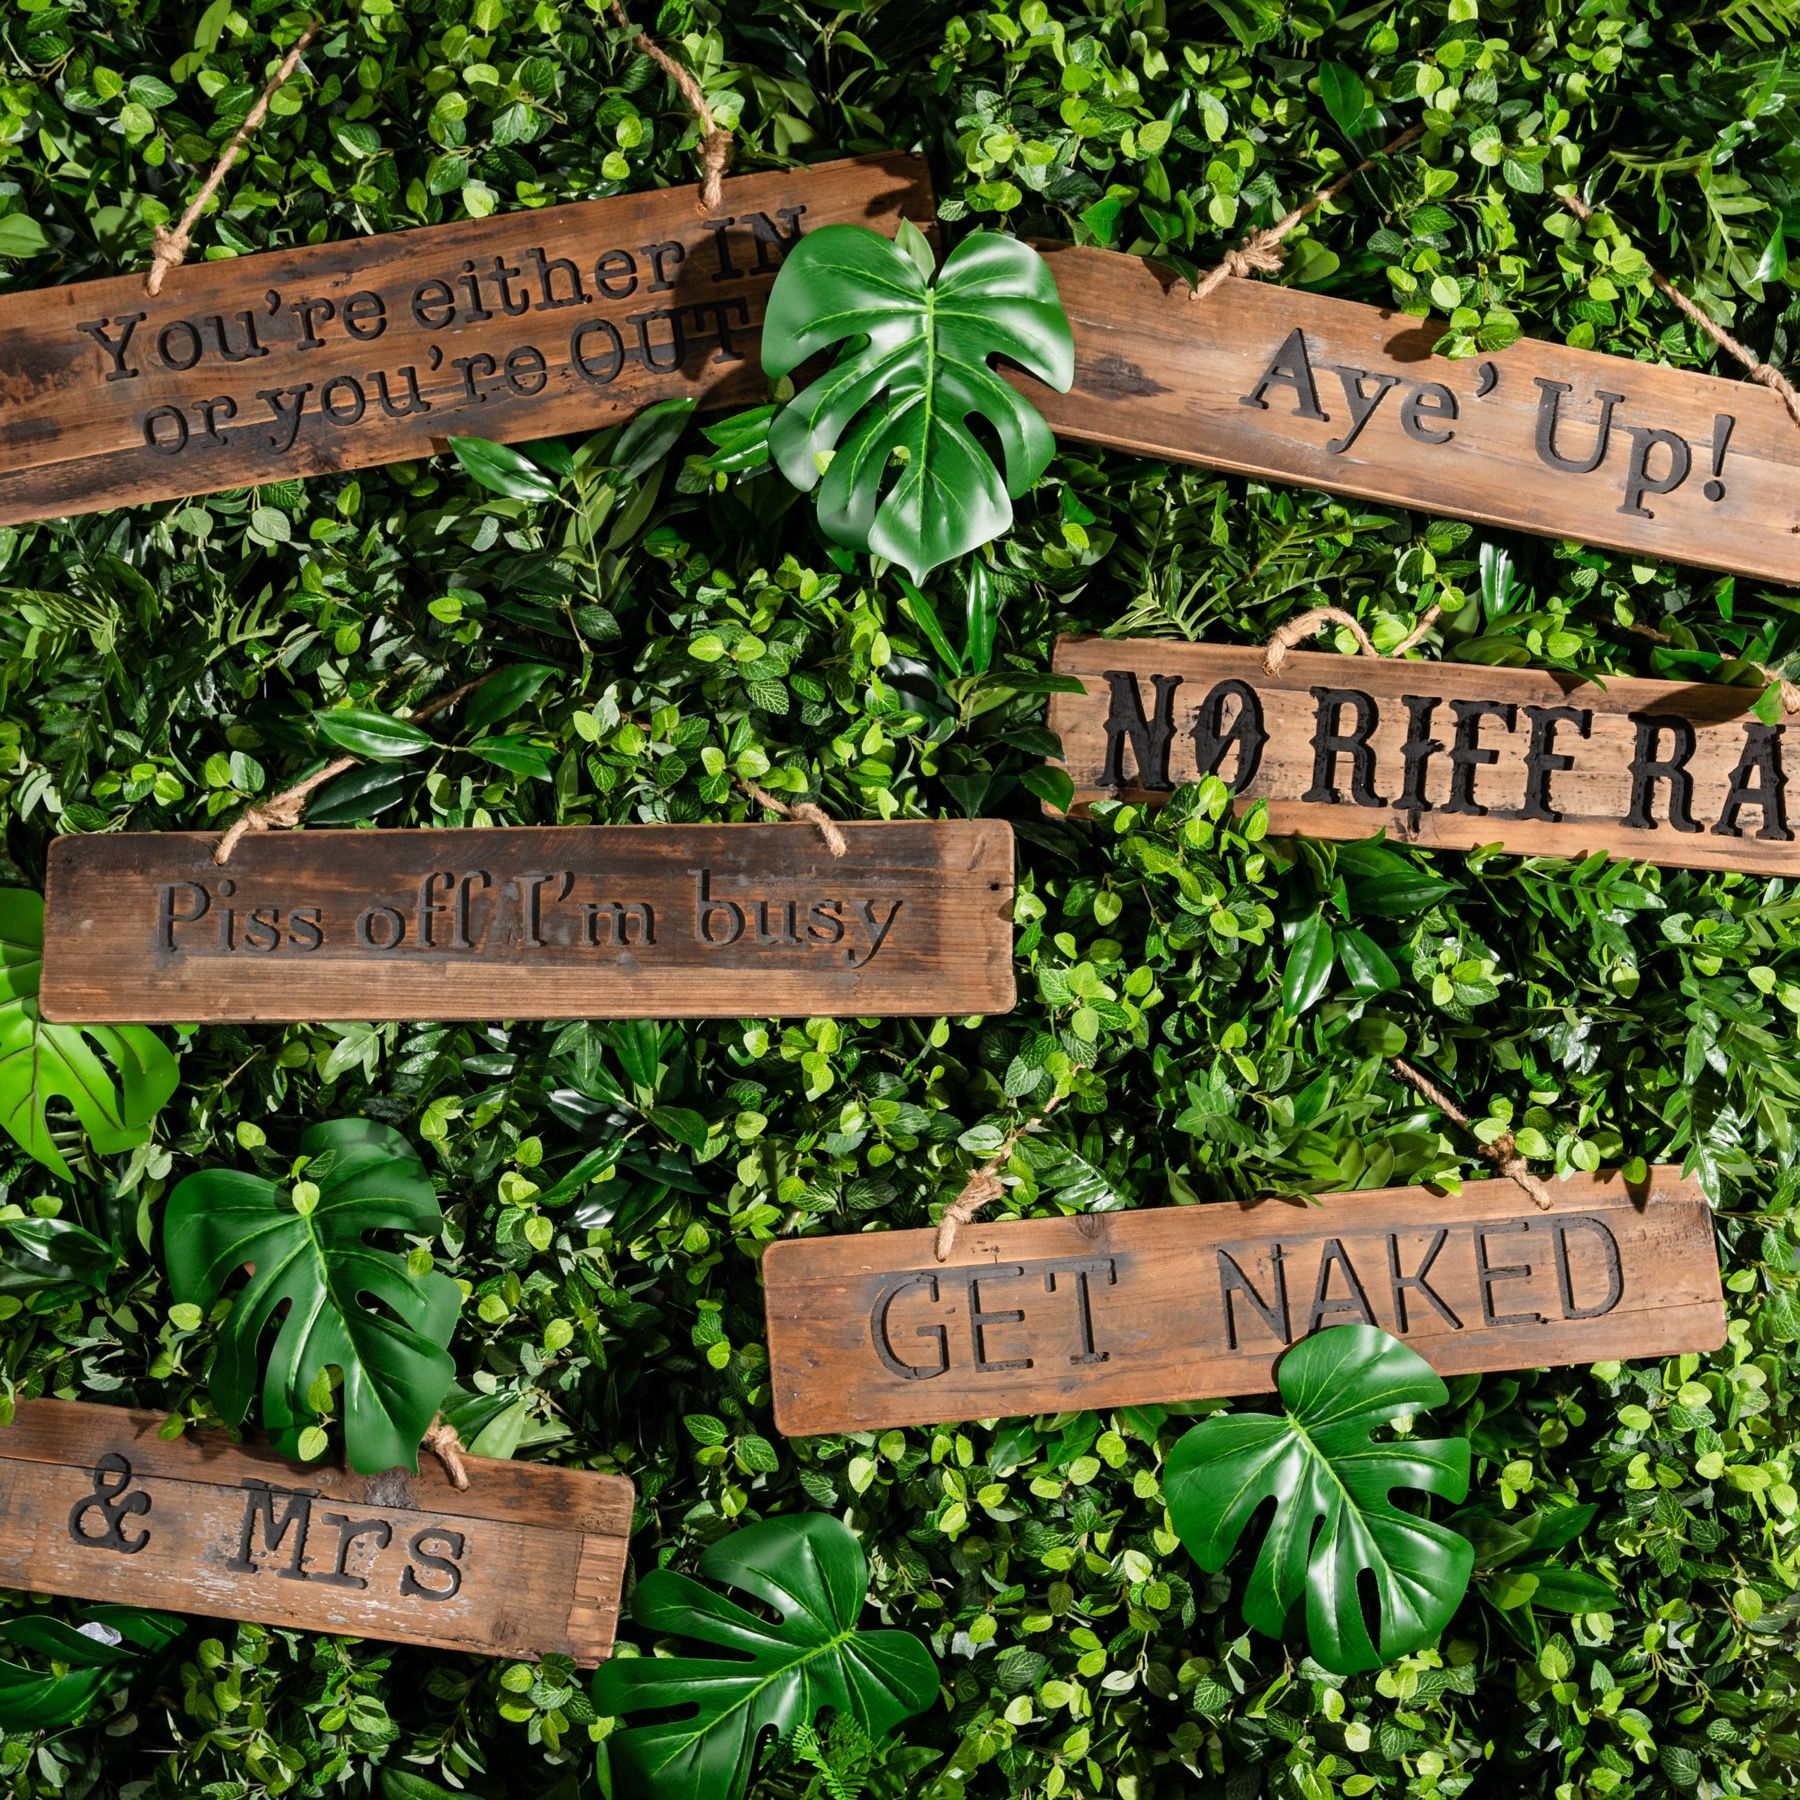 Aye' Up Rustic Wooden Message Plaque - Image 2